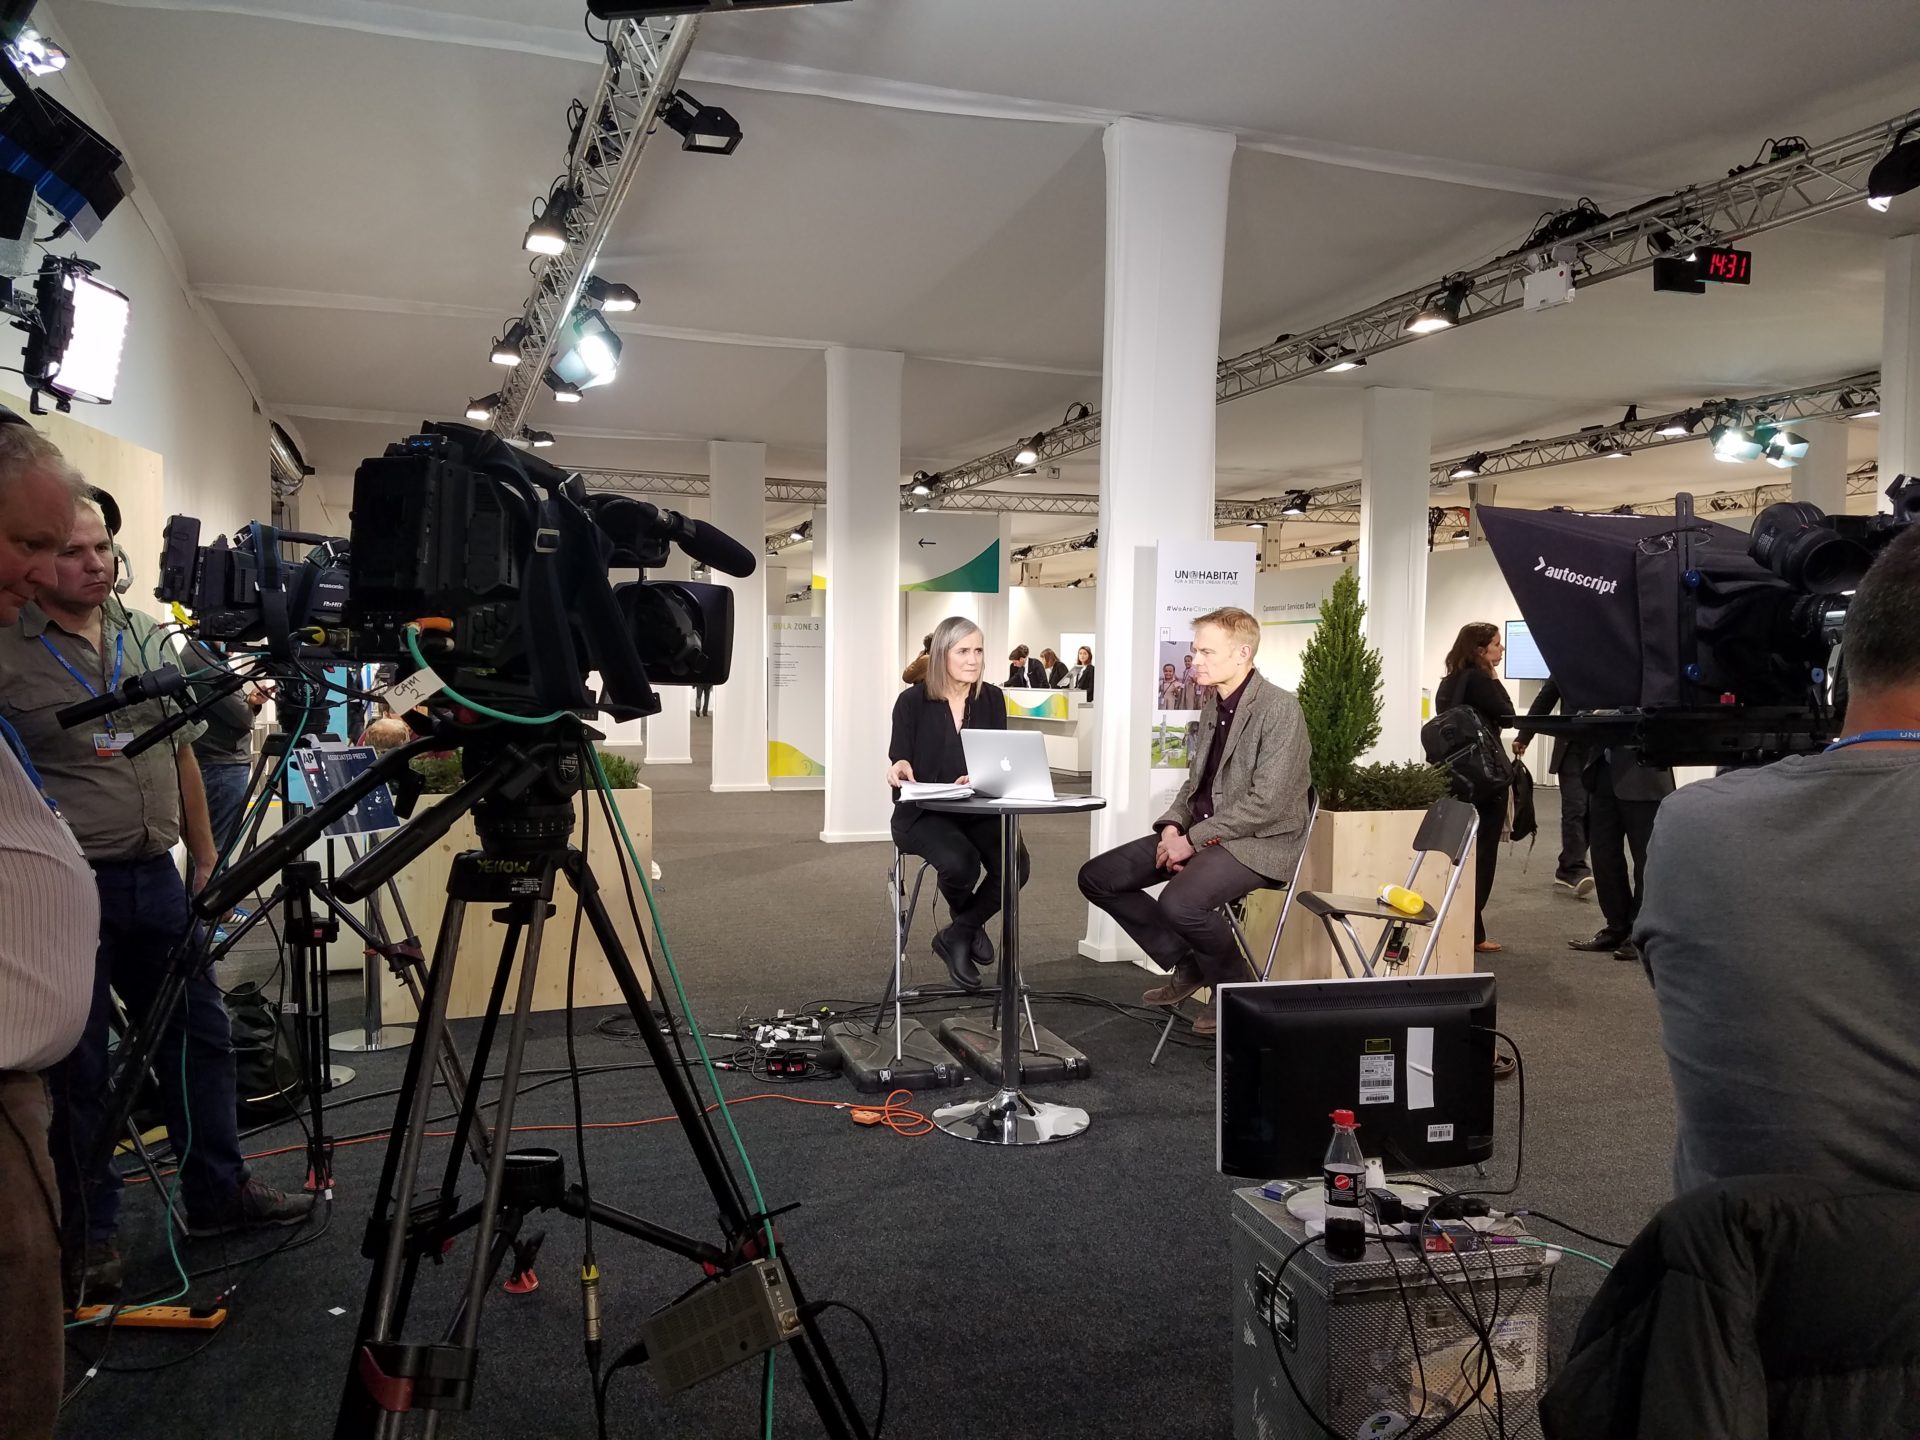 Amy Goodman of Democracy Now broadcasting from Bonn